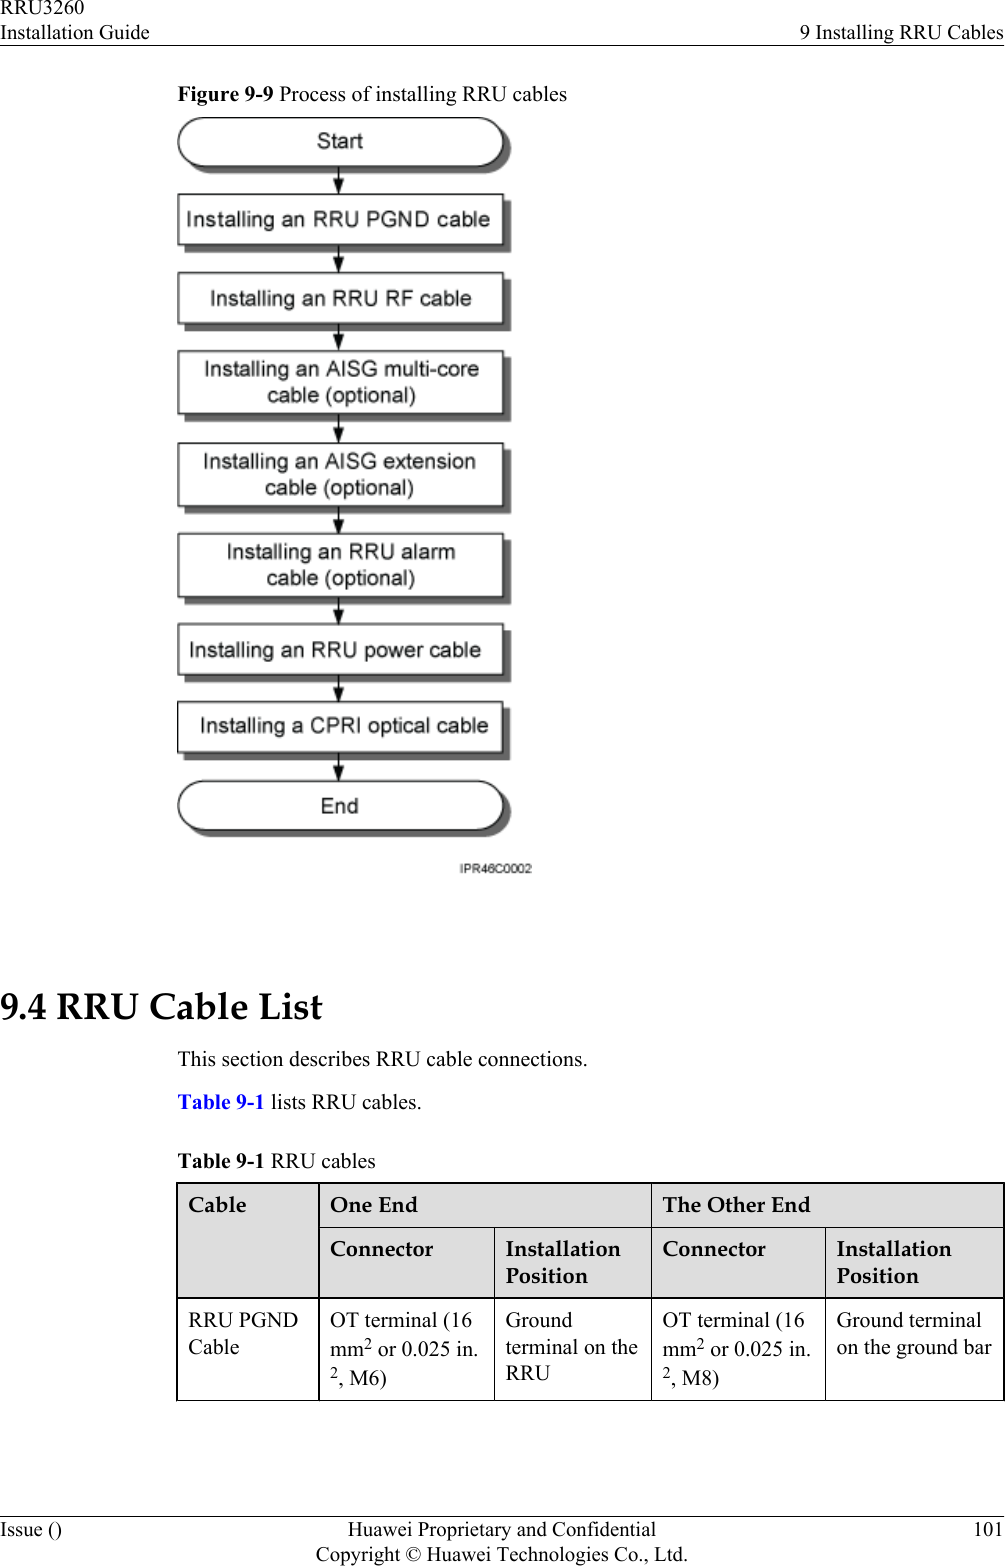 Figure 9-9 Process of installing RRU cables 9.4 RRU Cable ListThis section describes RRU cable connections.Table 9-1 lists RRU cables.Table 9-1 RRU cablesCable One End The Other EndConnector InstallationPositionConnector InstallationPositionRRU PGNDCableOT terminal (16mm2 or 0.025 in.2, M6)Groundterminal on theRRUOT terminal (16mm2 or 0.025 in.2, M8)Ground terminalon the ground barRRU3260Installation Guide 9 Installing RRU CablesIssue () Huawei Proprietary and ConfidentialCopyright © Huawei Technologies Co., Ltd.101